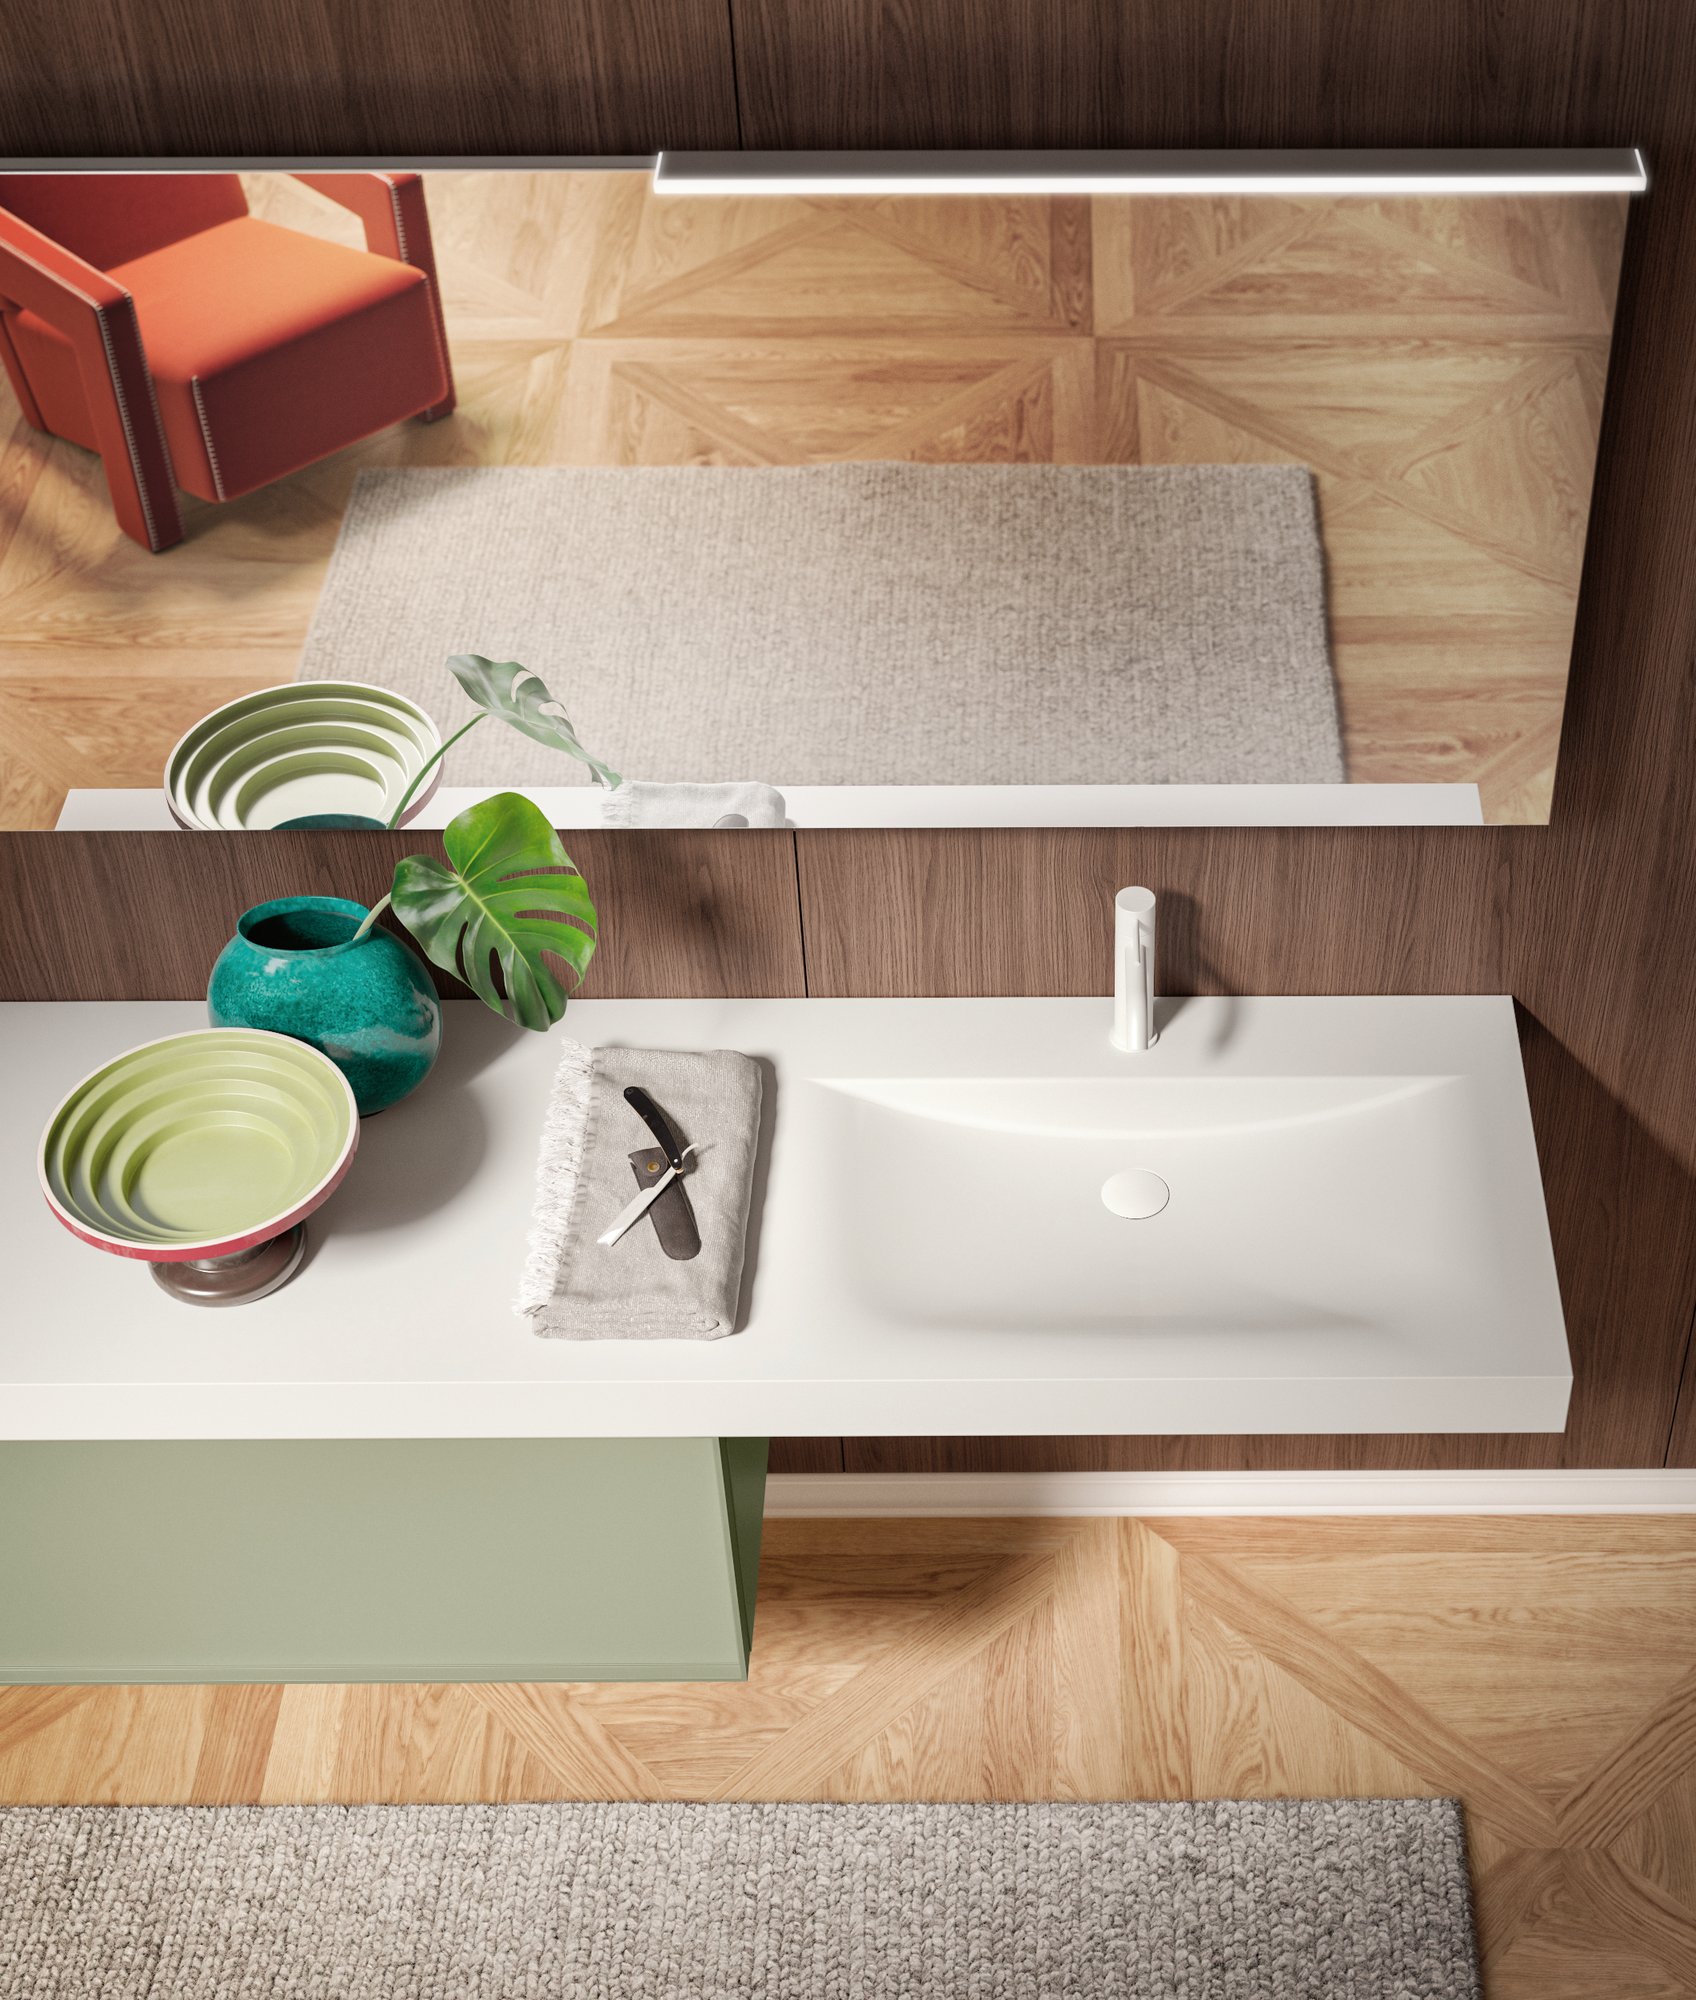 White bathroom countertop with lower storage cabinet in green